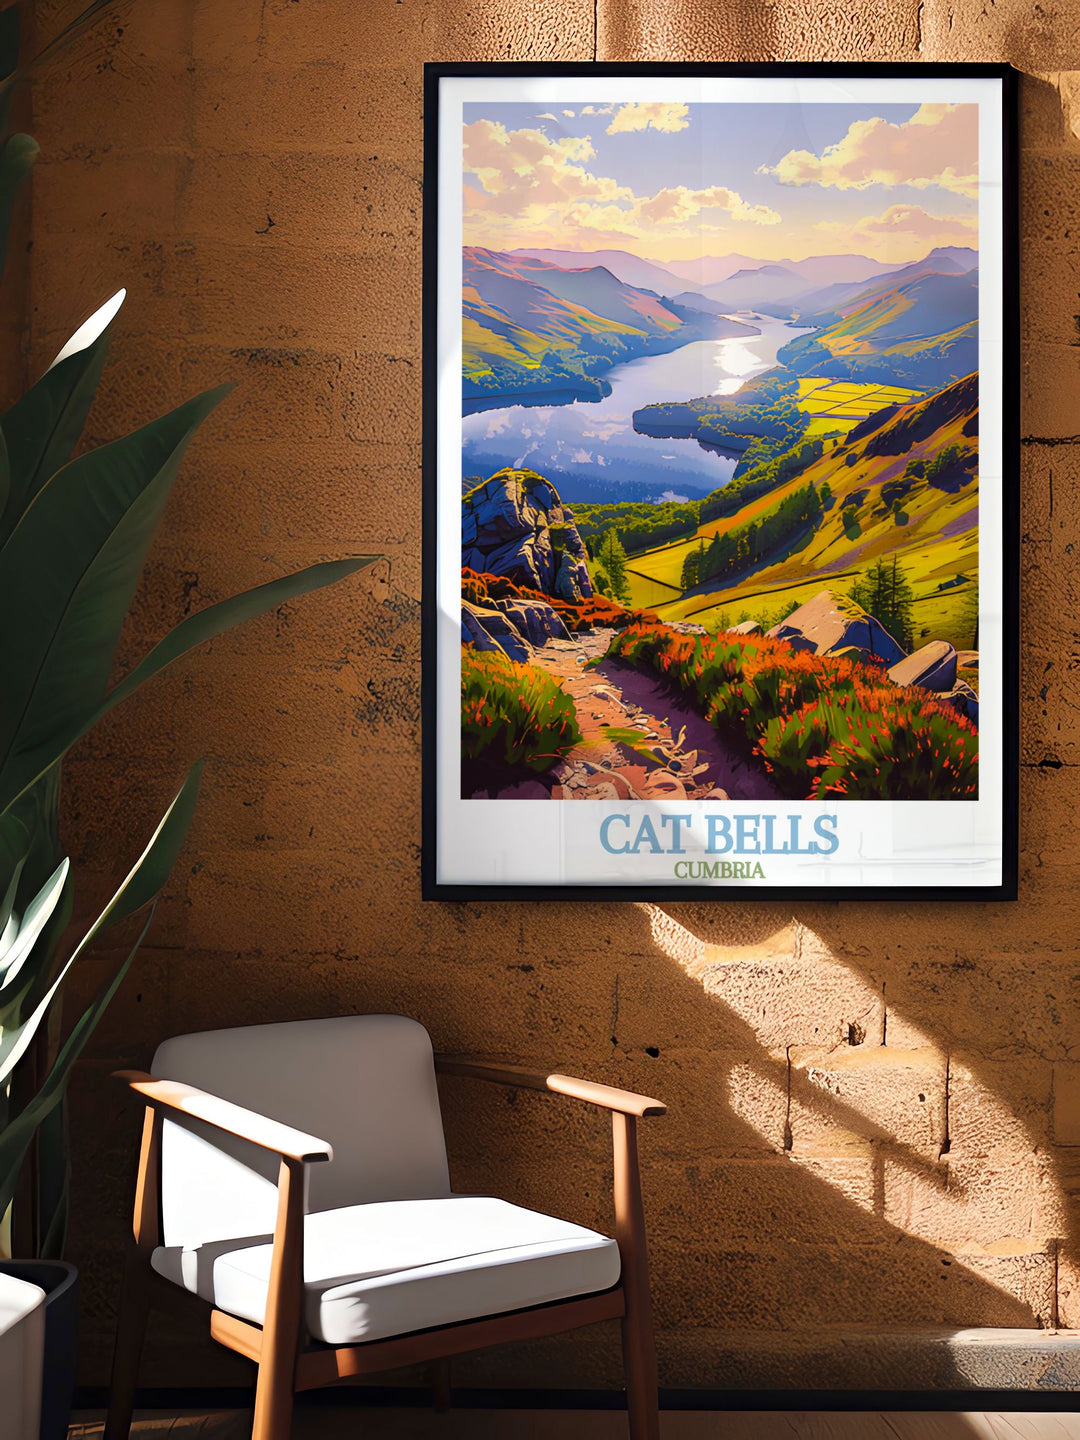 Explore the beauty of Cat Bells Summit with our nature inspired Cumbria illustration perfect for enhancing your home decor this travel poster is a wonderful gift for hikers and those who appreciate the stunning landscapes of the Lake District.